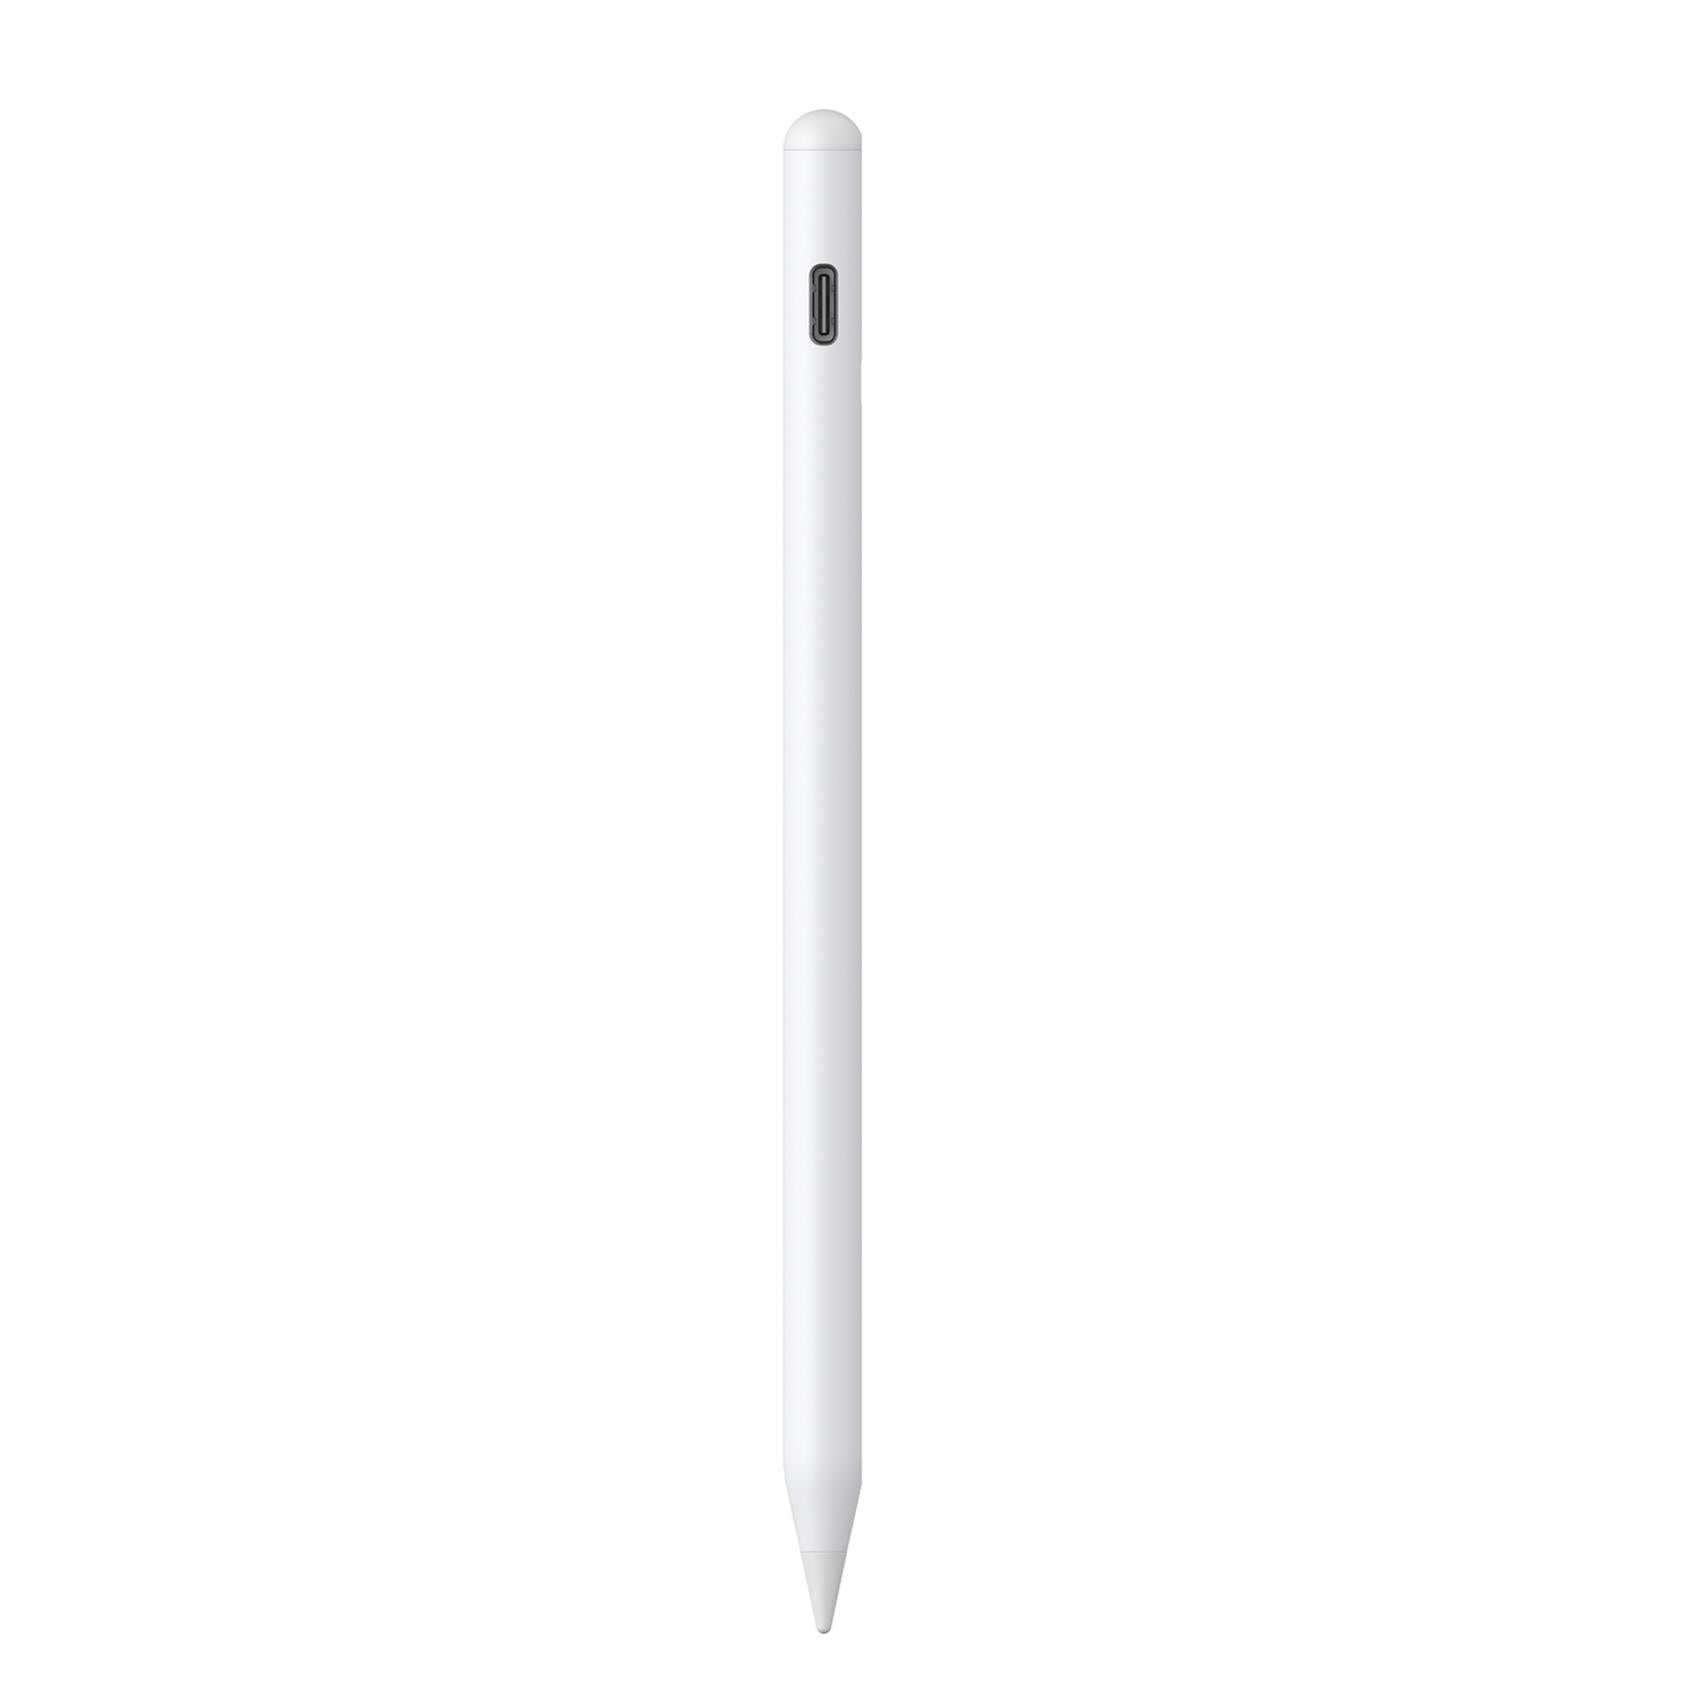 Celly SWMAGICPENCILWH - Smart pencil for iPad